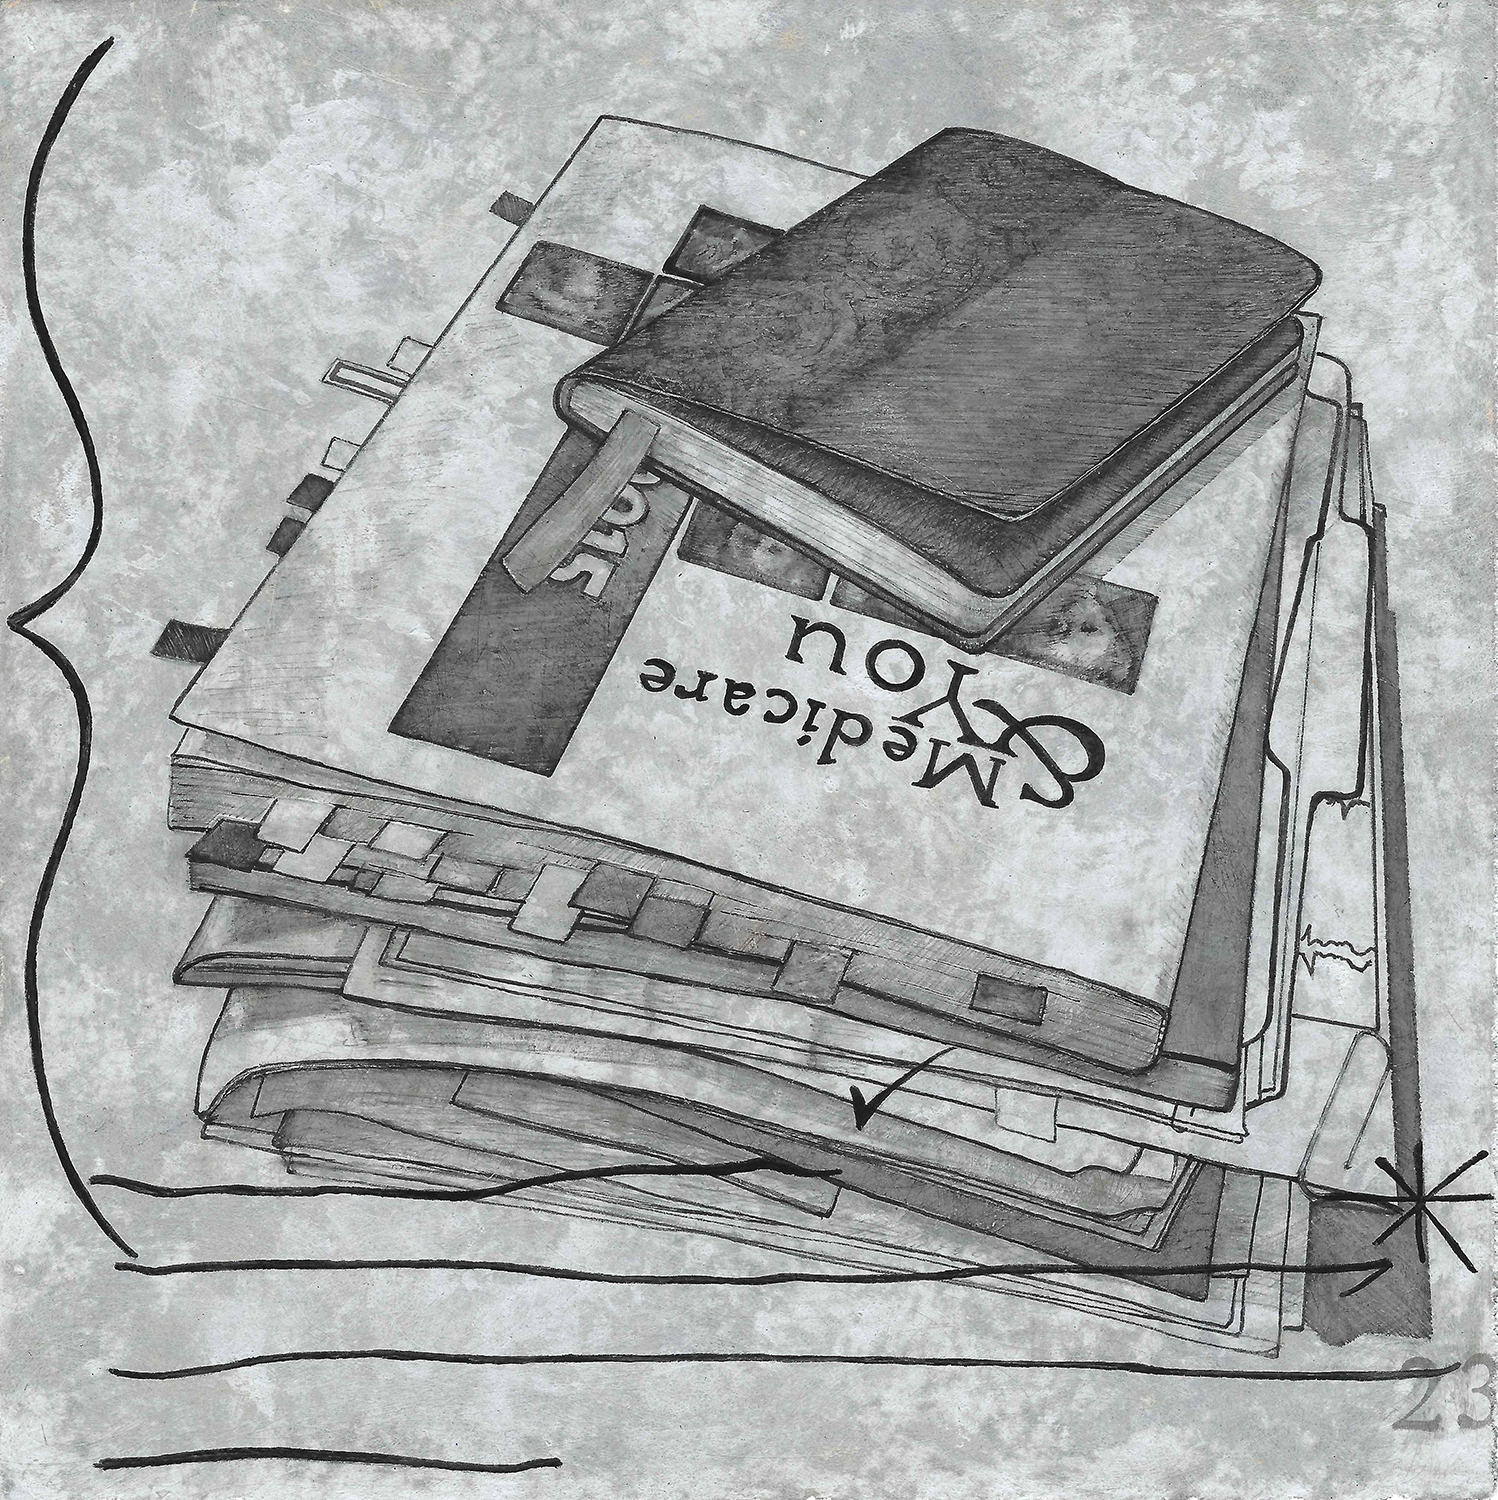 Black and white print or illustration with a stack of books